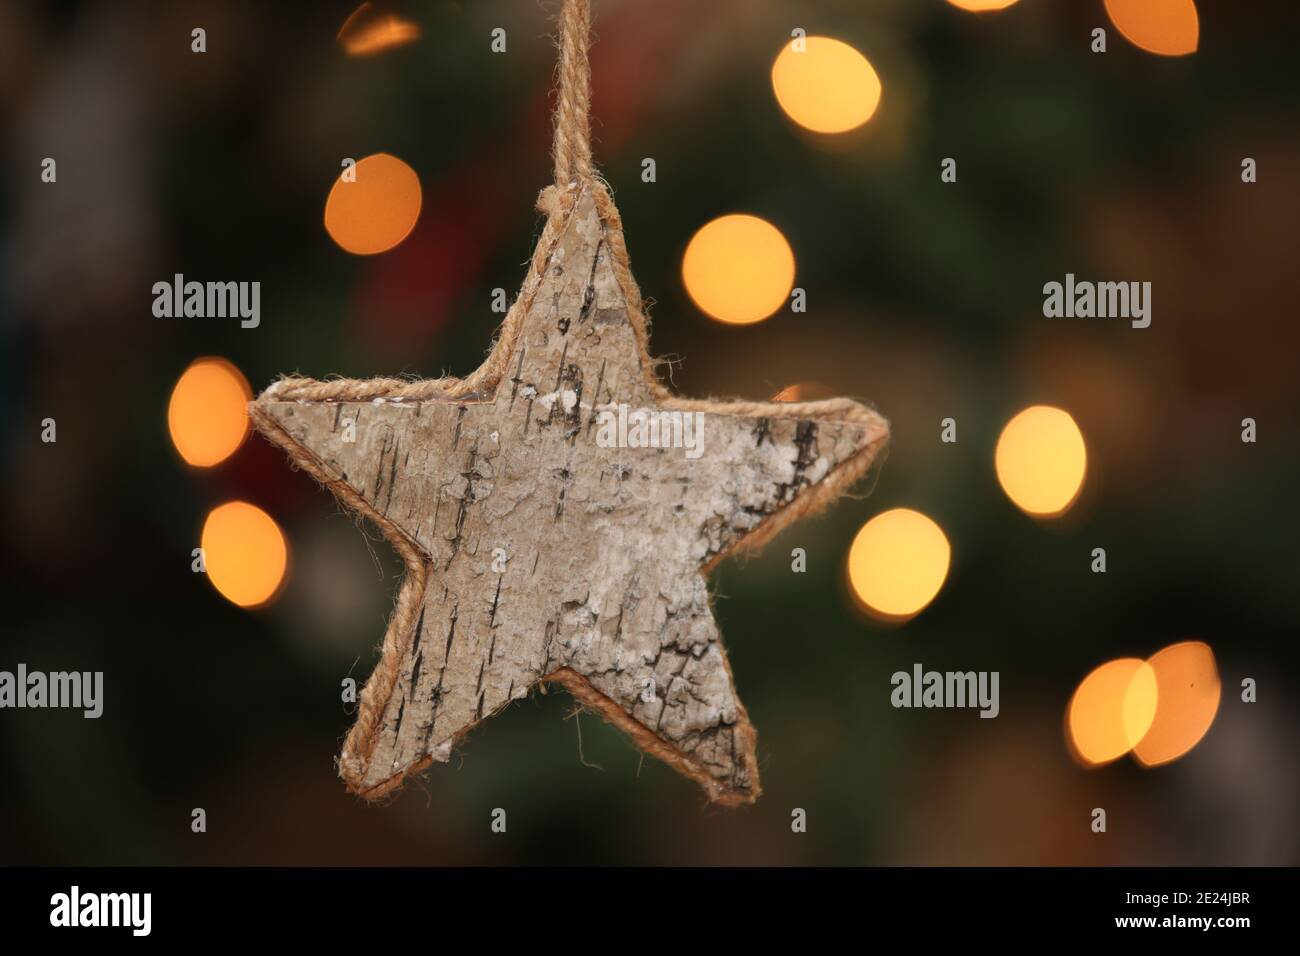 Handmade star-shaped ornament with a Christmas tree in the background Stock Photo